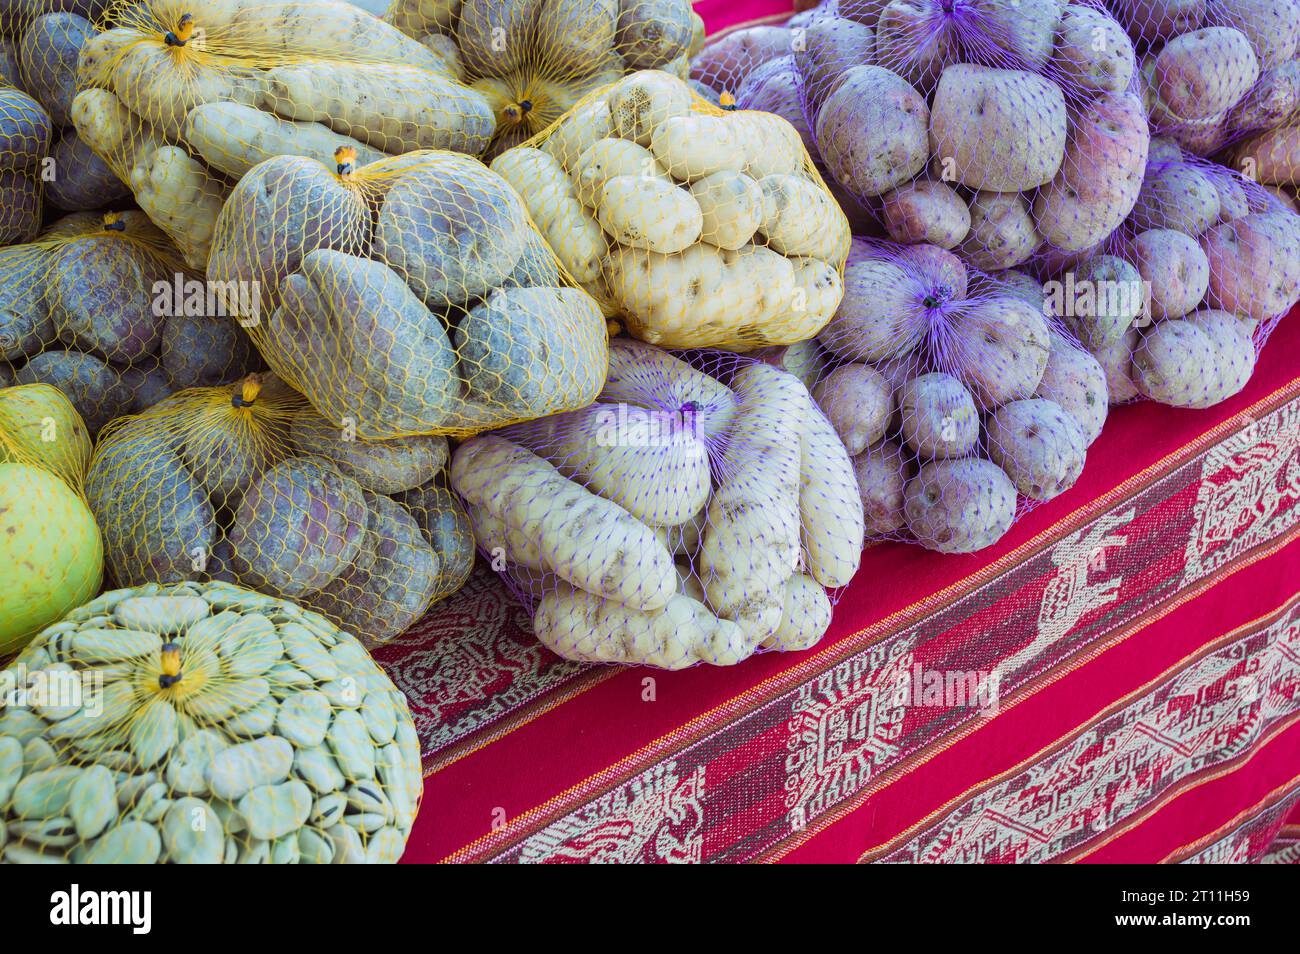 The vibrant colors and variety of vegetables are a true feast for the eyes in the peruvian markets Stock Photo